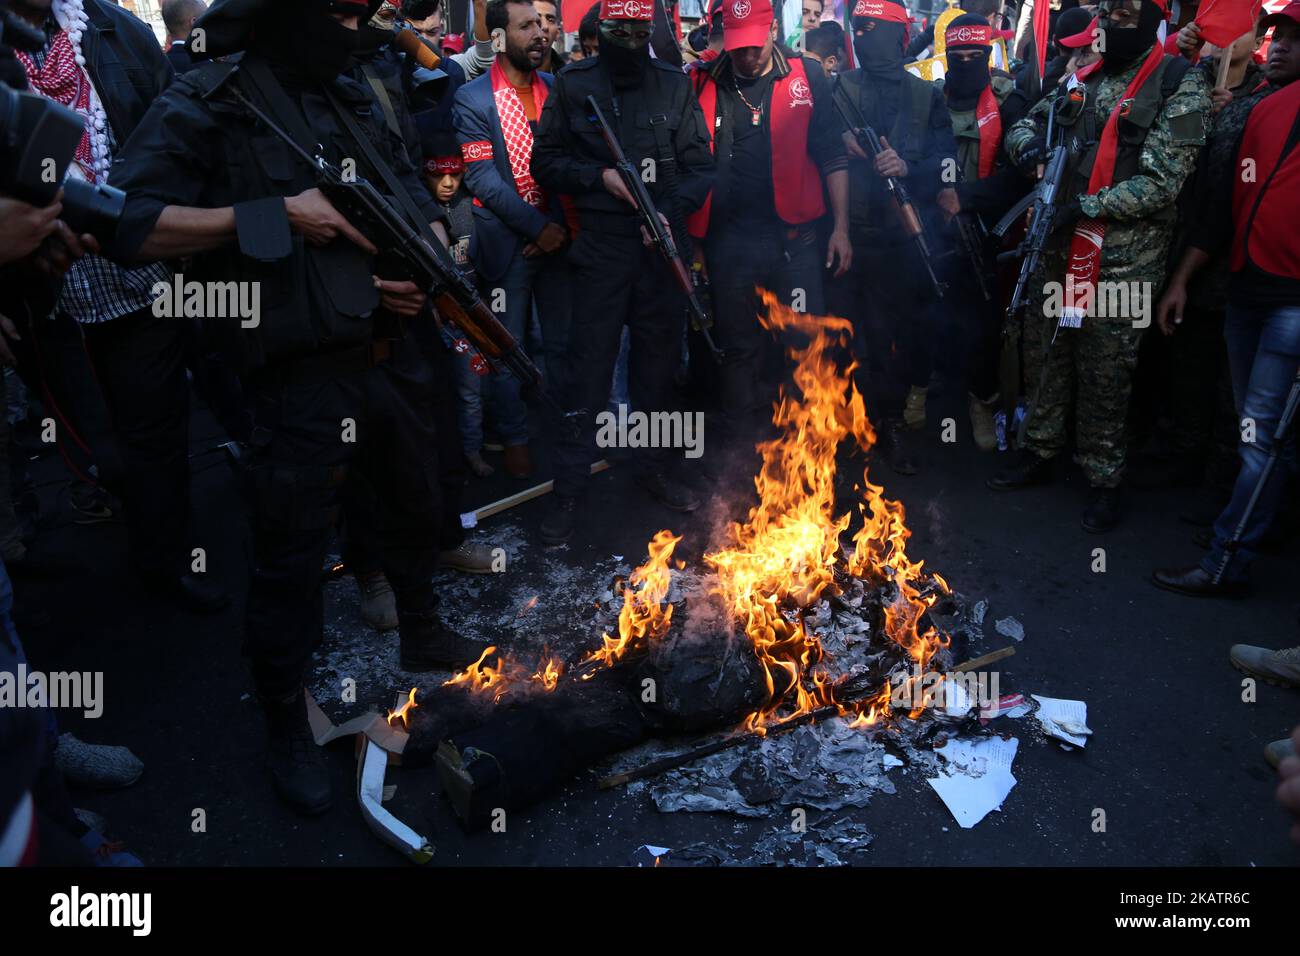 Palestinian militants of the Popular Front for the Liberation of Palestine (PFLP) burn representations of an Israeli flag and a U.S. flag during a protest against Trump's decision to recognize Jerusalem as the capital of Israel, in Gaza City December 9, 2017. (Photo by Majdi Fathi/NurPhoto) Stock Photo